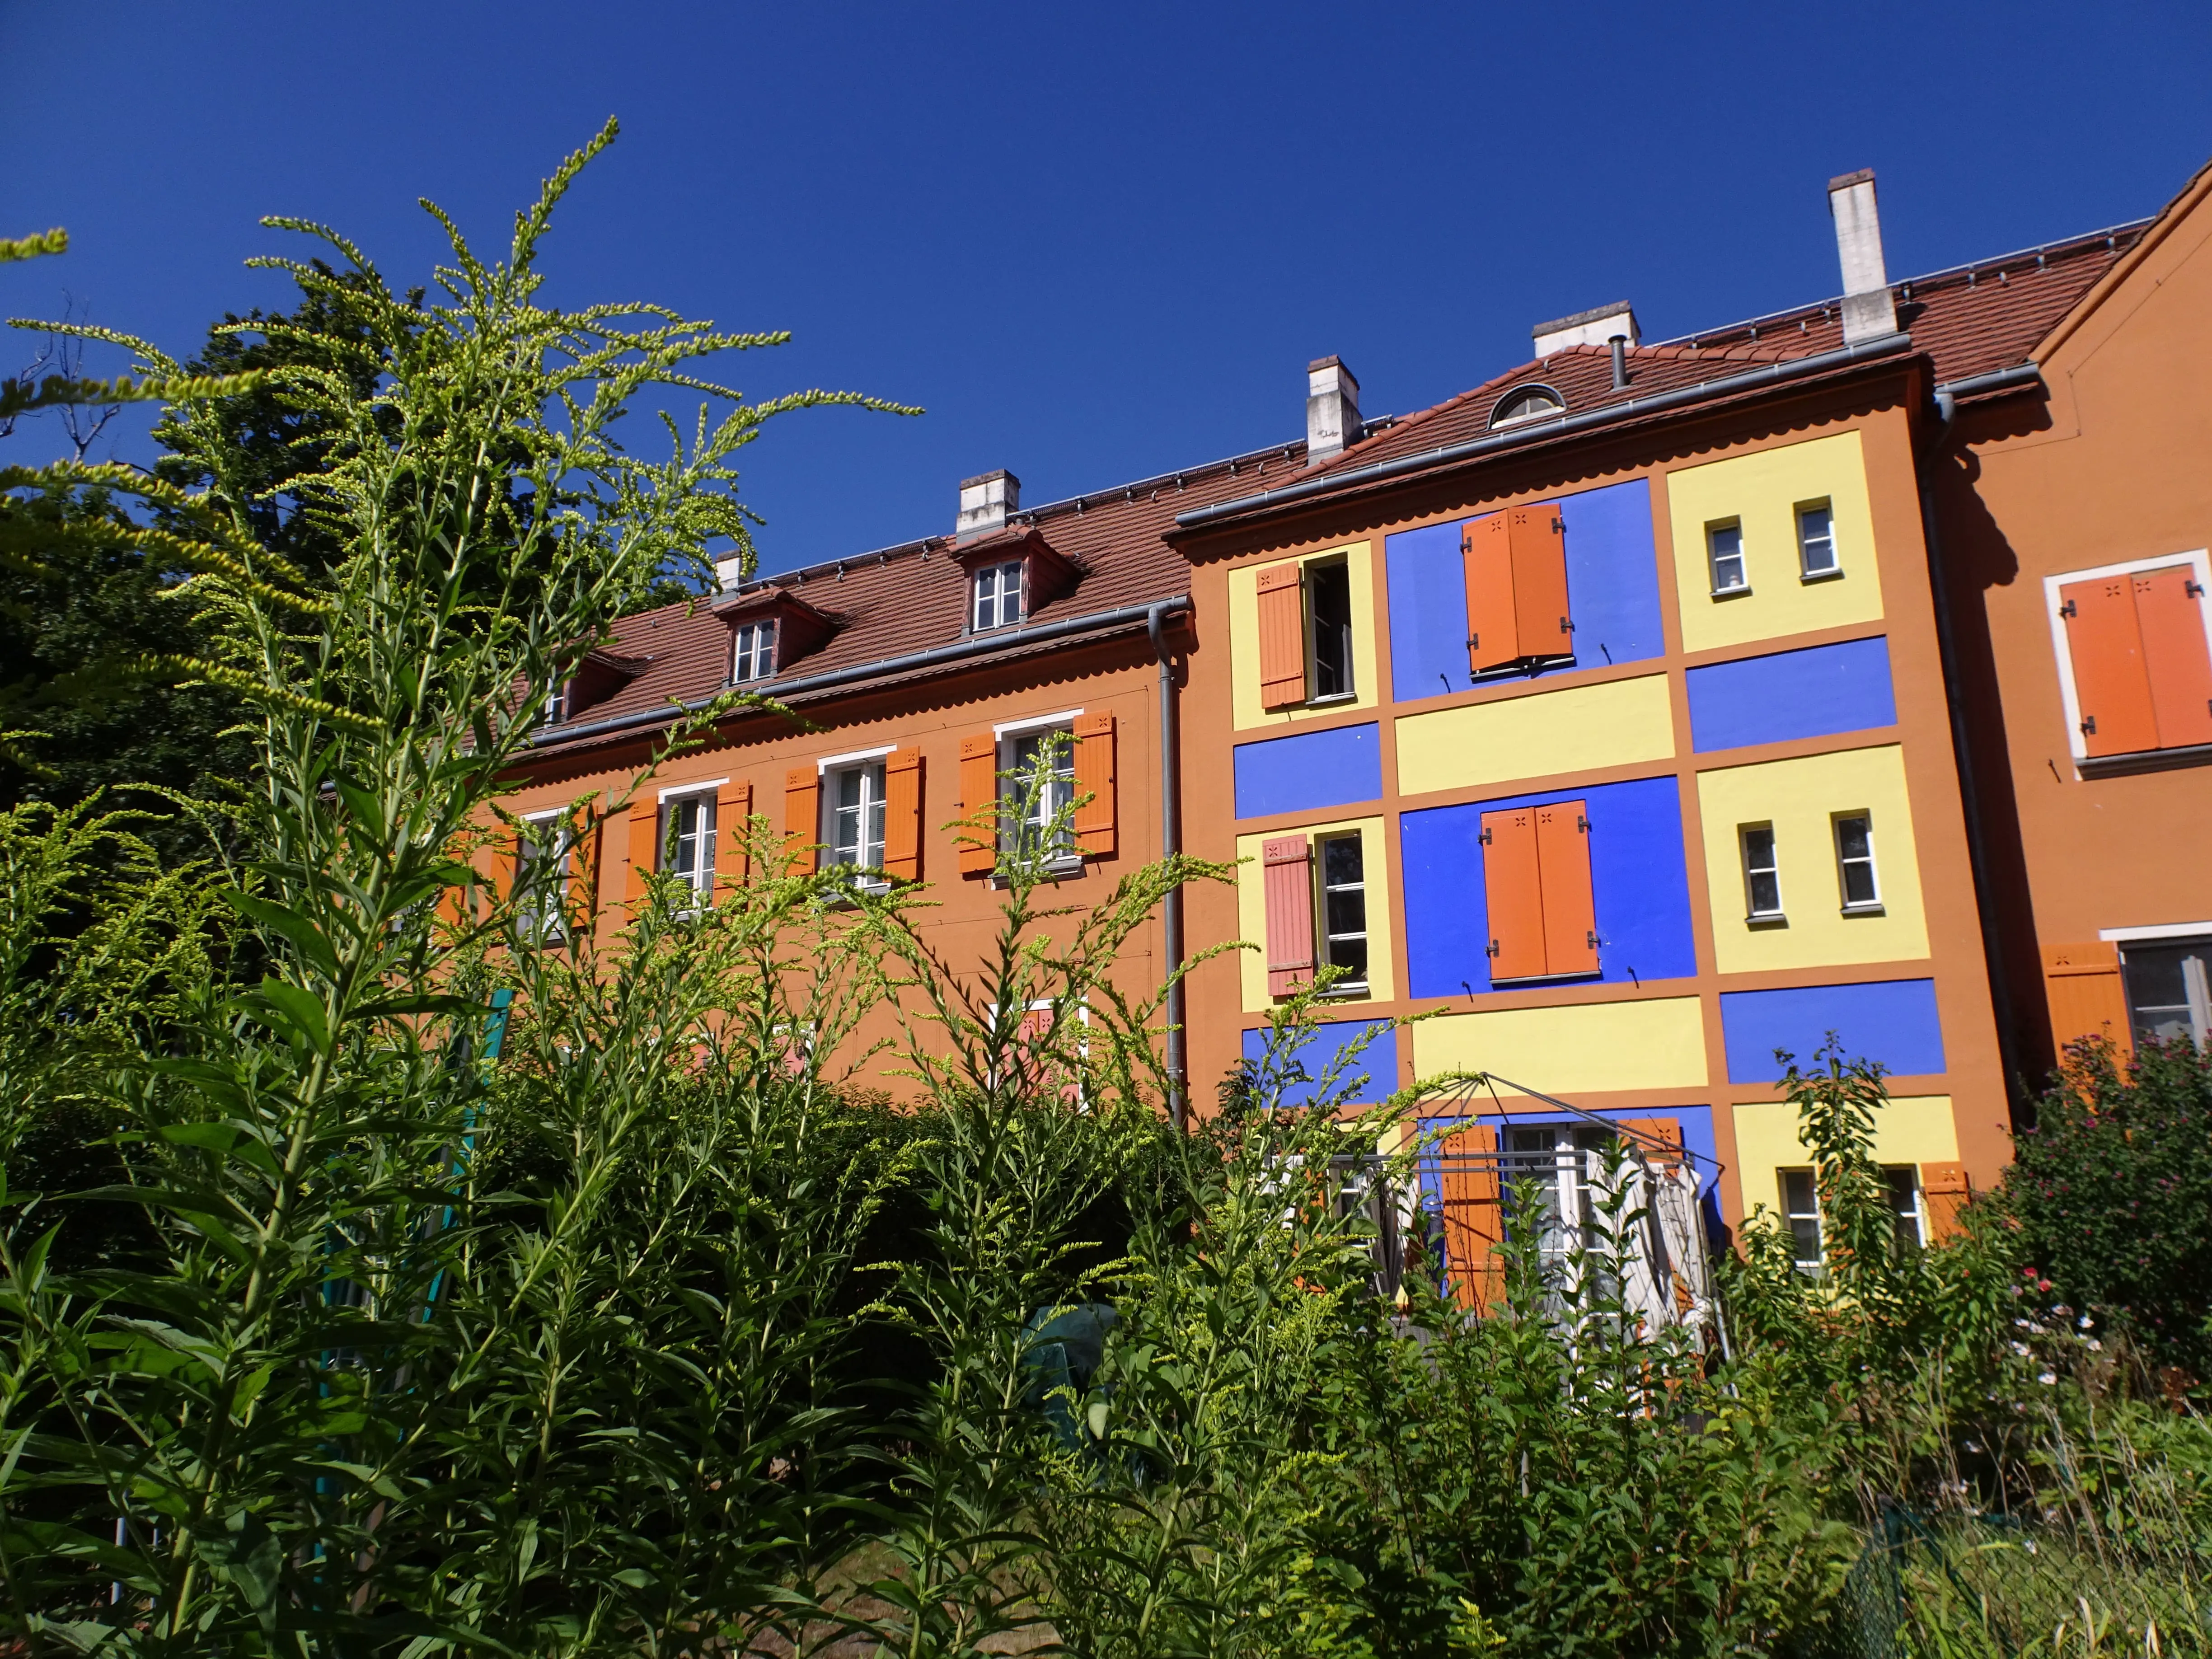 Brightly painted houses with flowery gardens